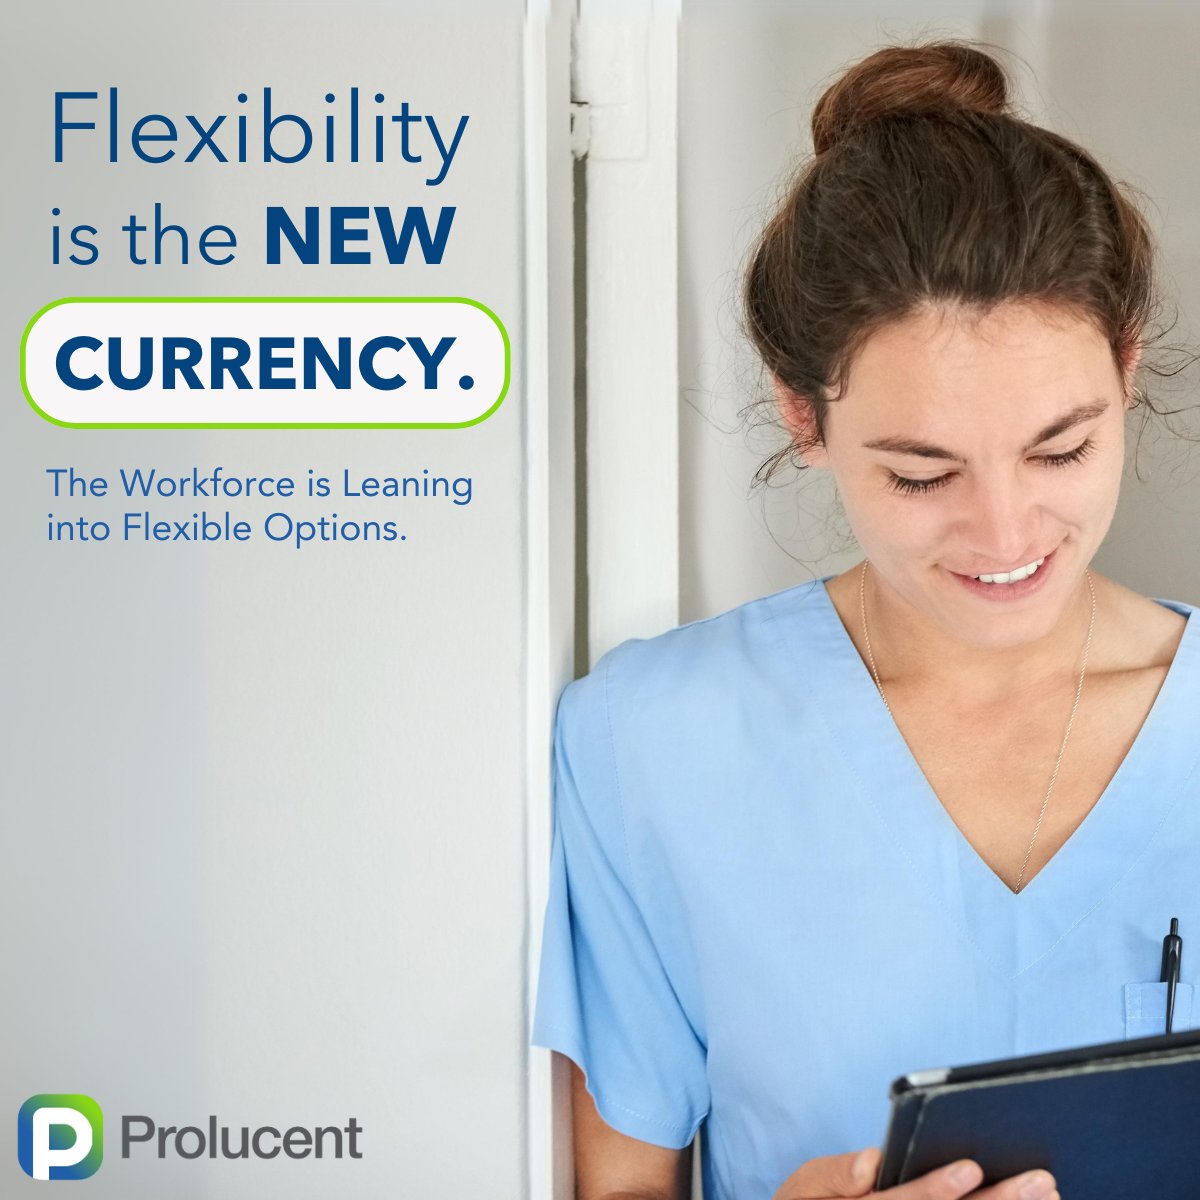 The workforce is leaning into flexibility. Make sure you have the right technology and partner to support it. hubs.ly/Q02wnCp80

#flexibleworkforce #prolucent #internalagency #internalresourcepool #healthcareworkforce #heathcarerecruiting